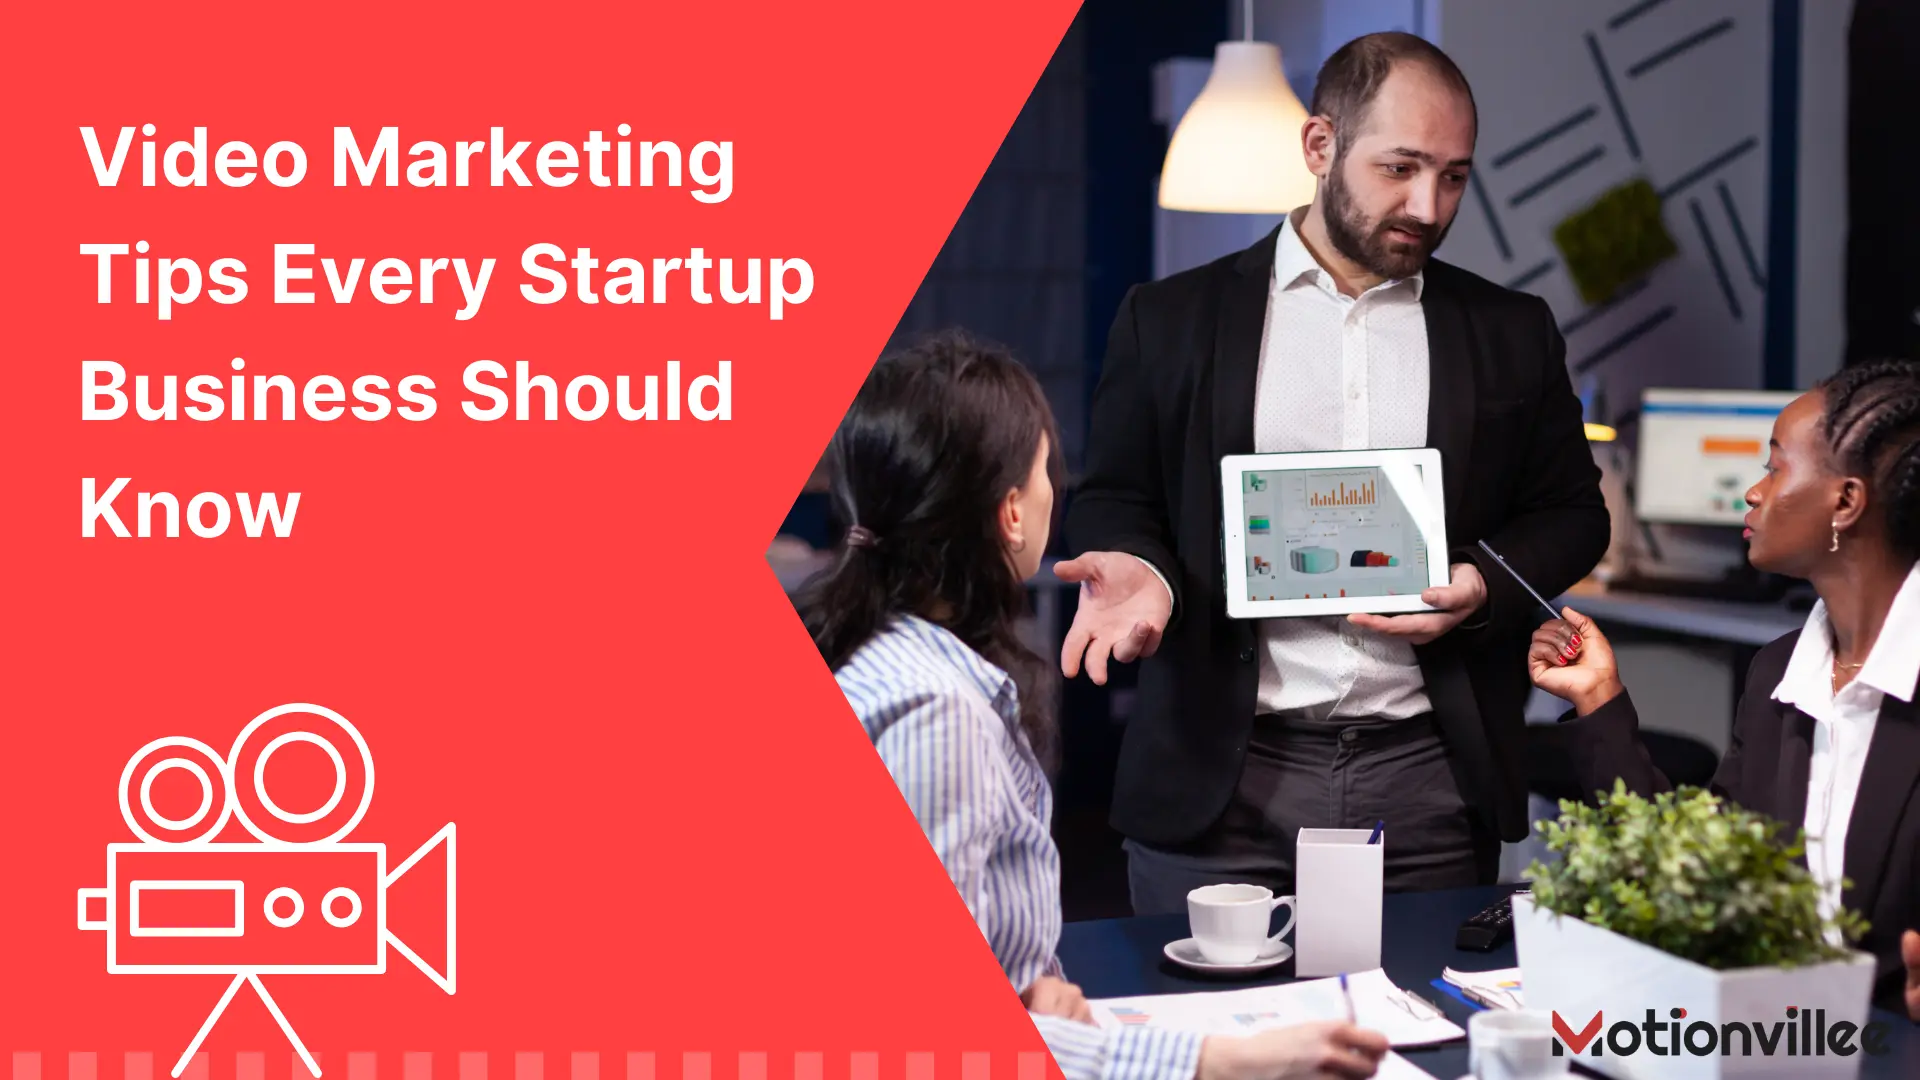 Video Marketing Tips Every Startup Business Should Know